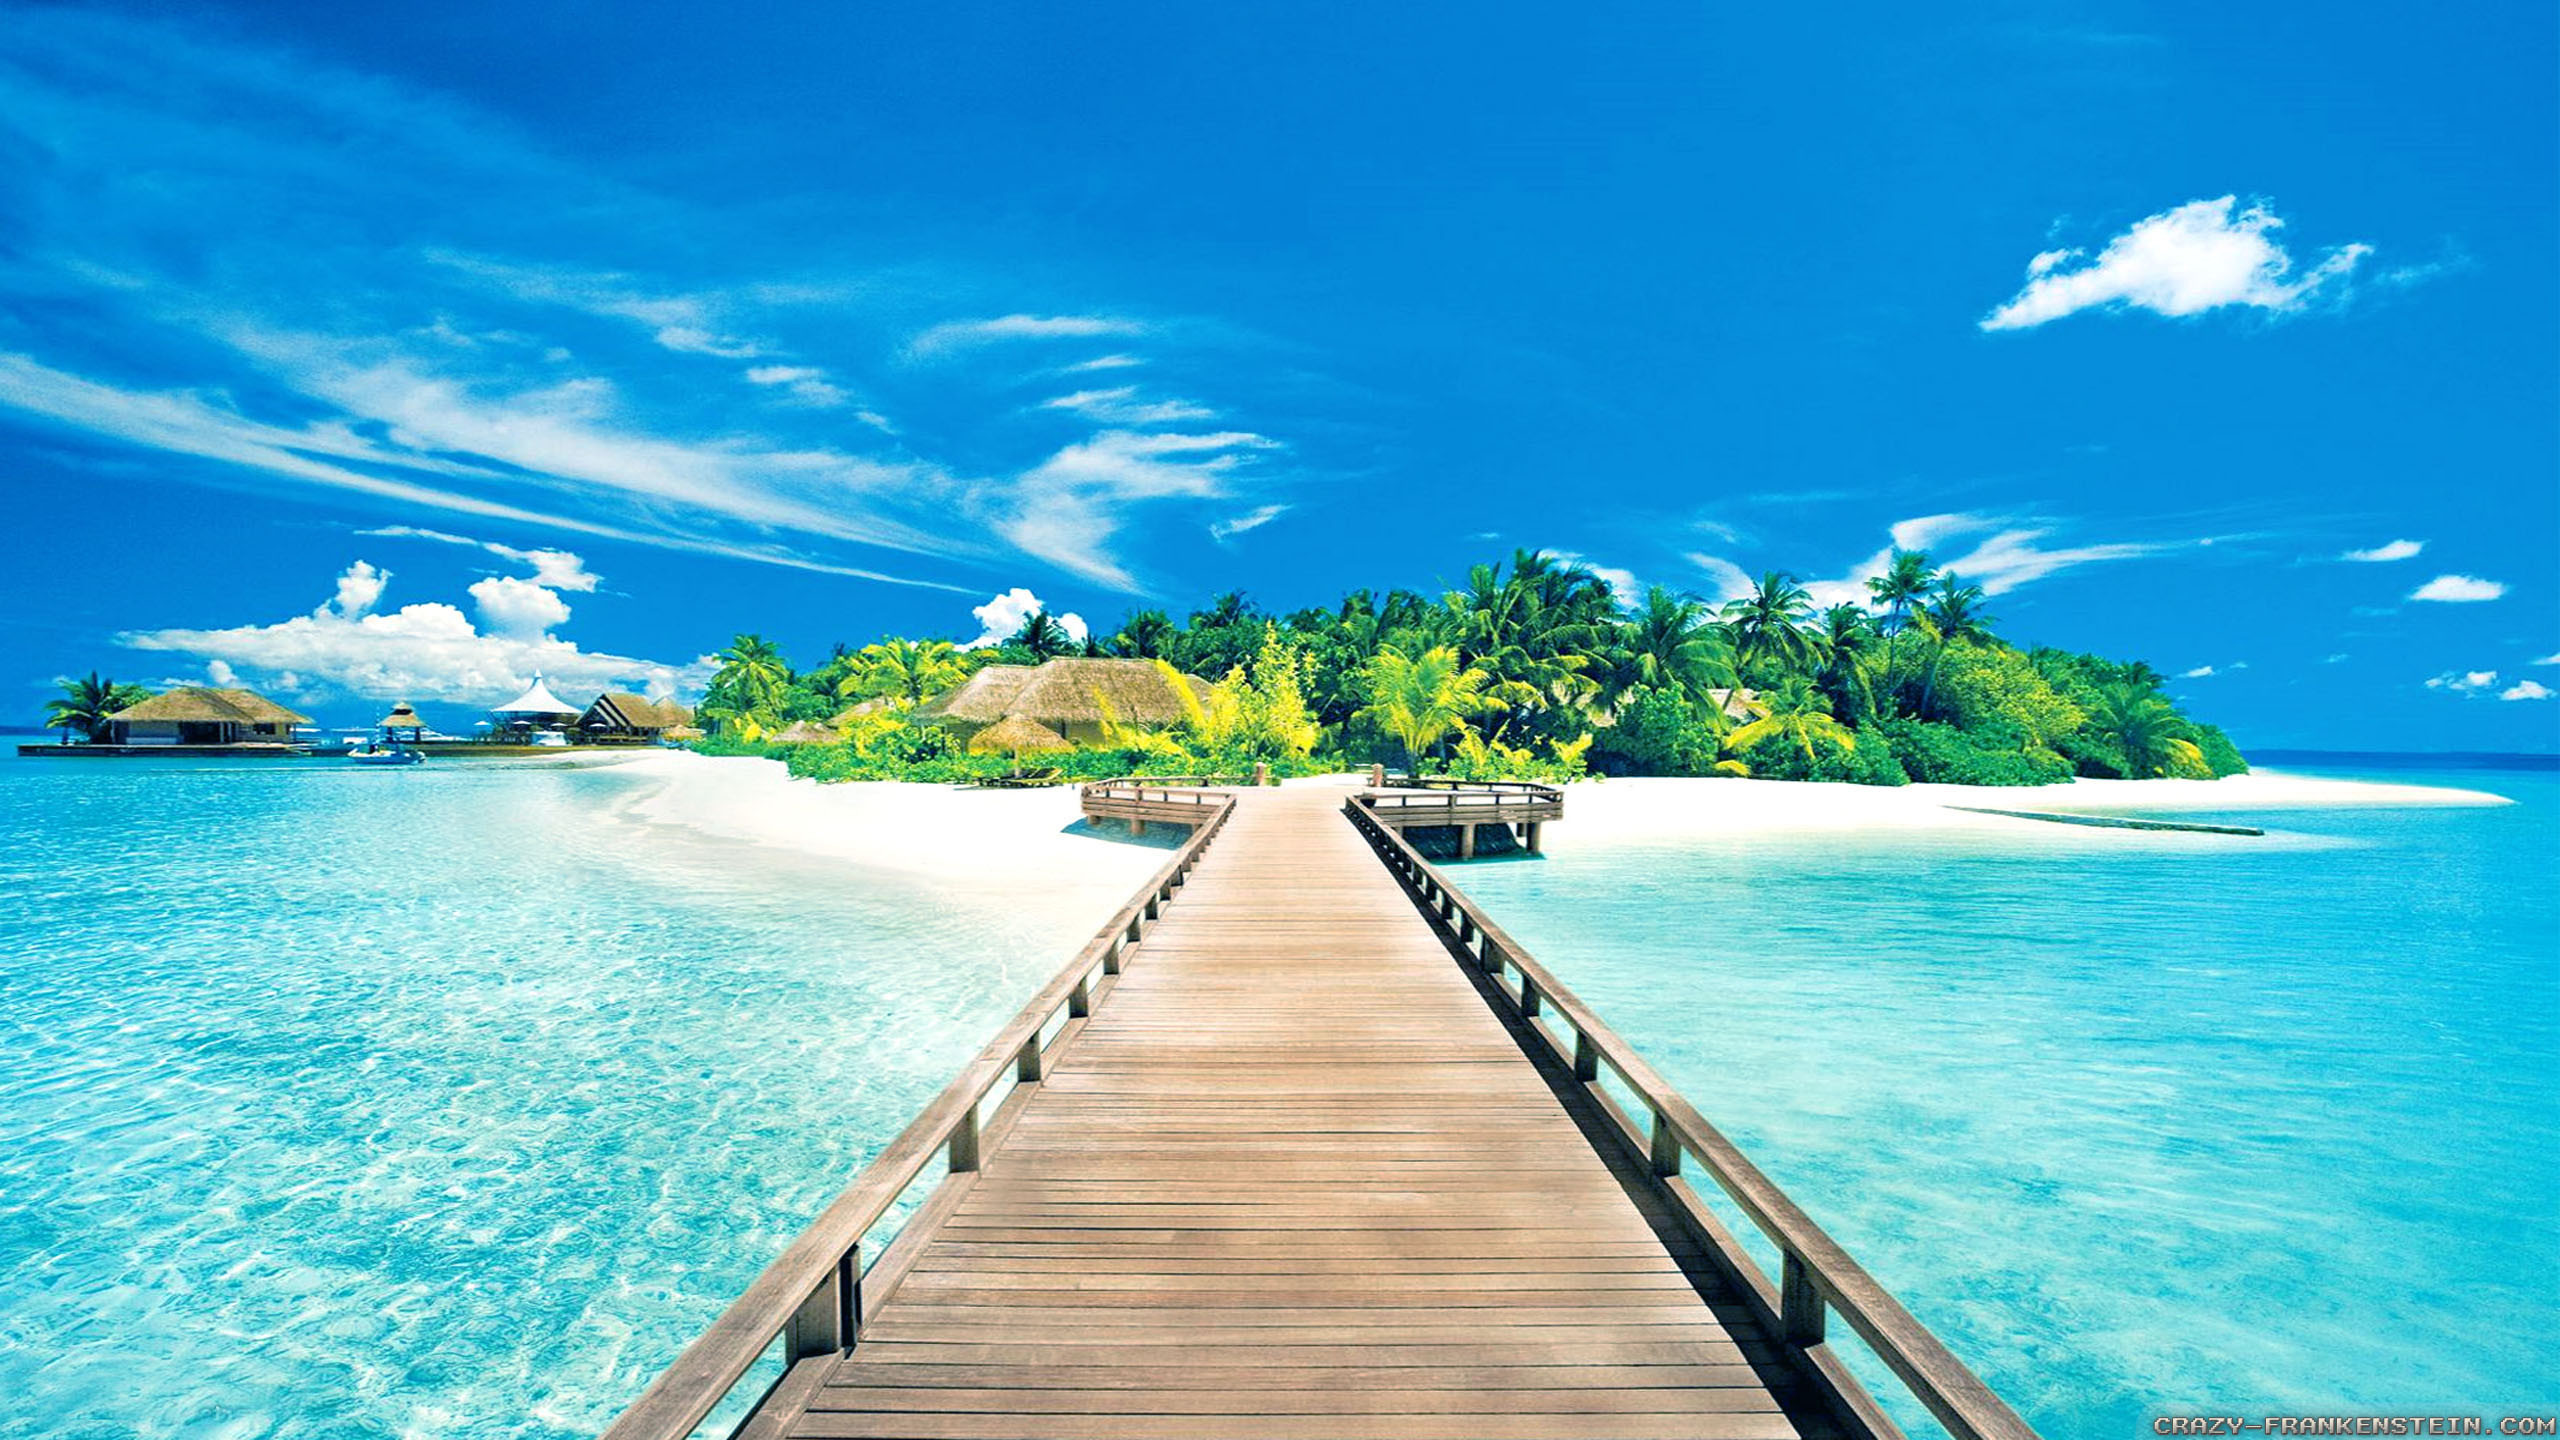 Maldives Summer Background Hd Background Wallpapers Free Cool 2560x1440